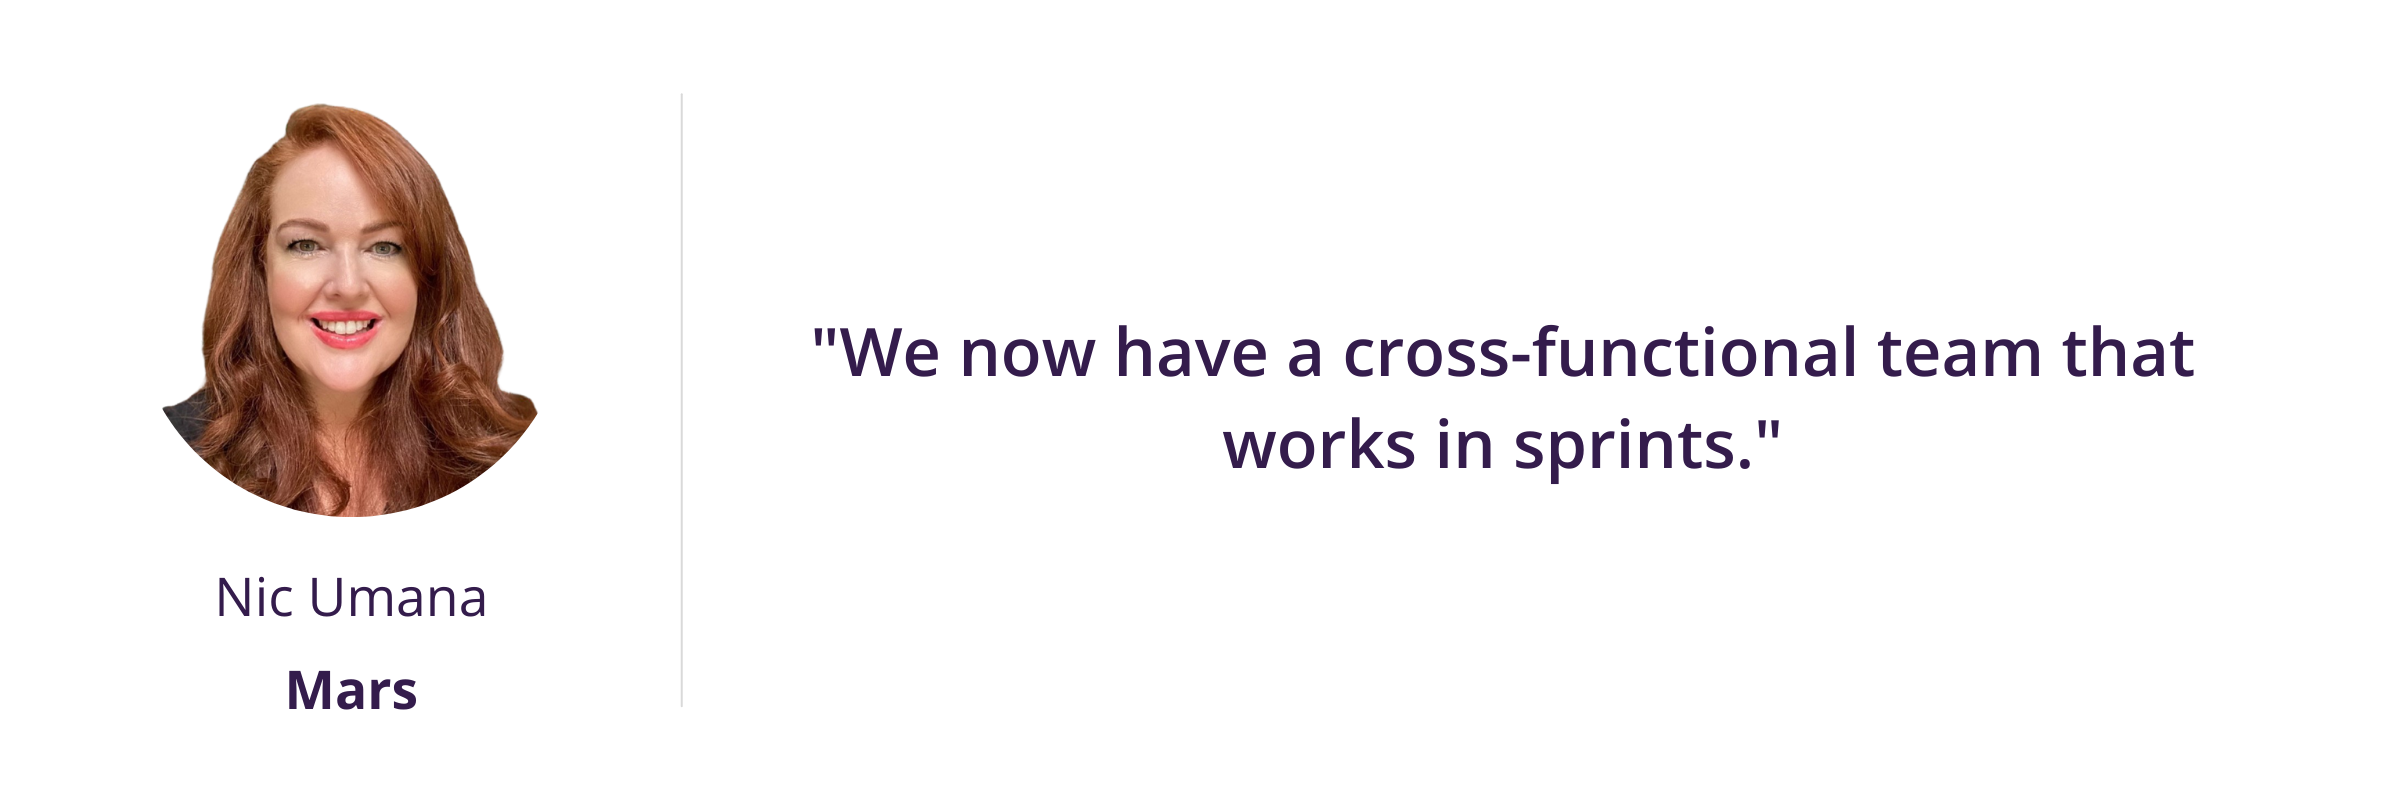 "We now have a cross-functional team that works in sprints."